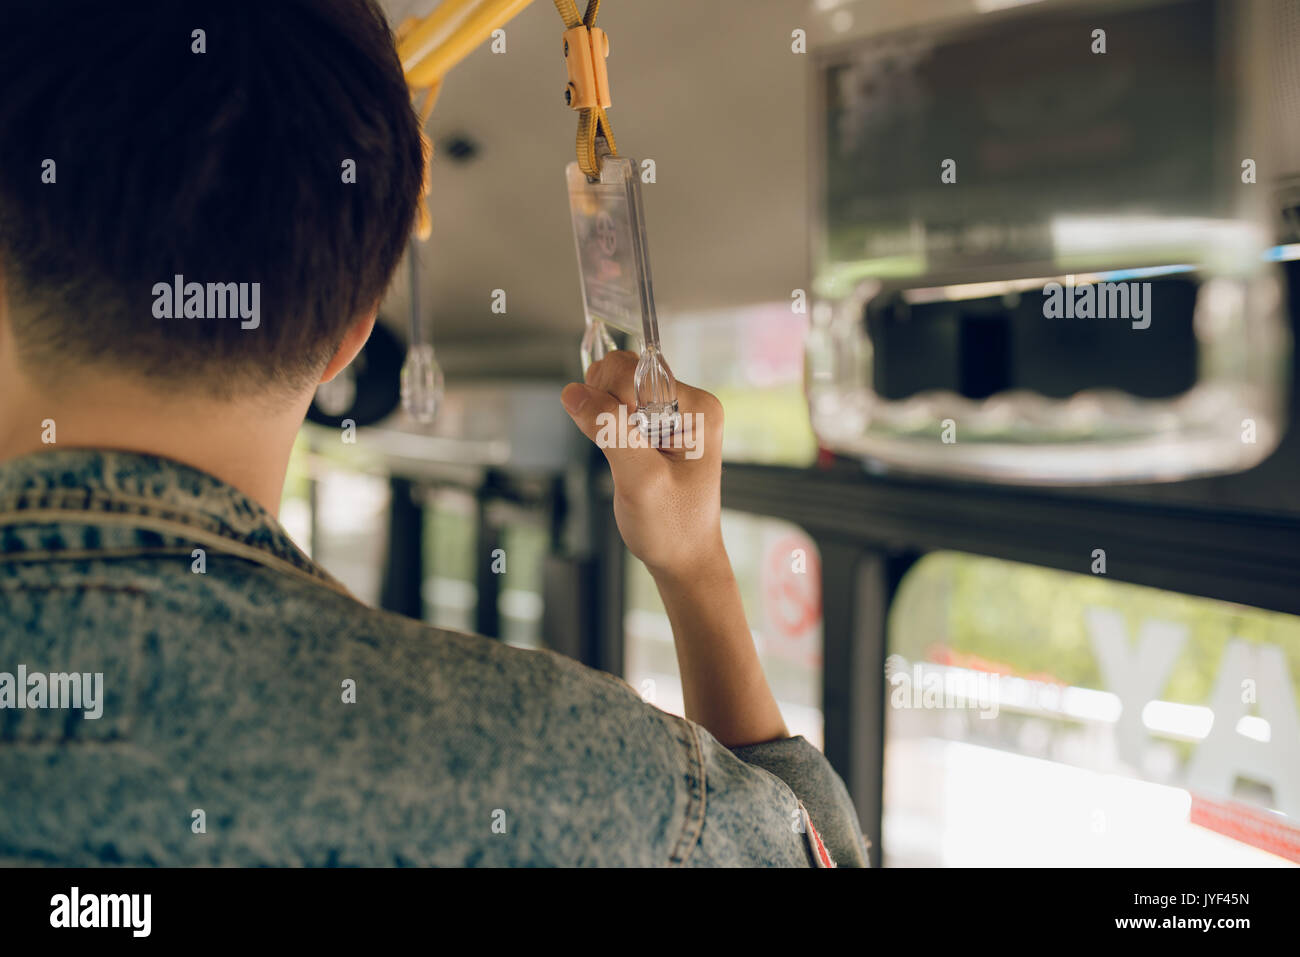 Male hand holding onto a handle of bus Stock Photo